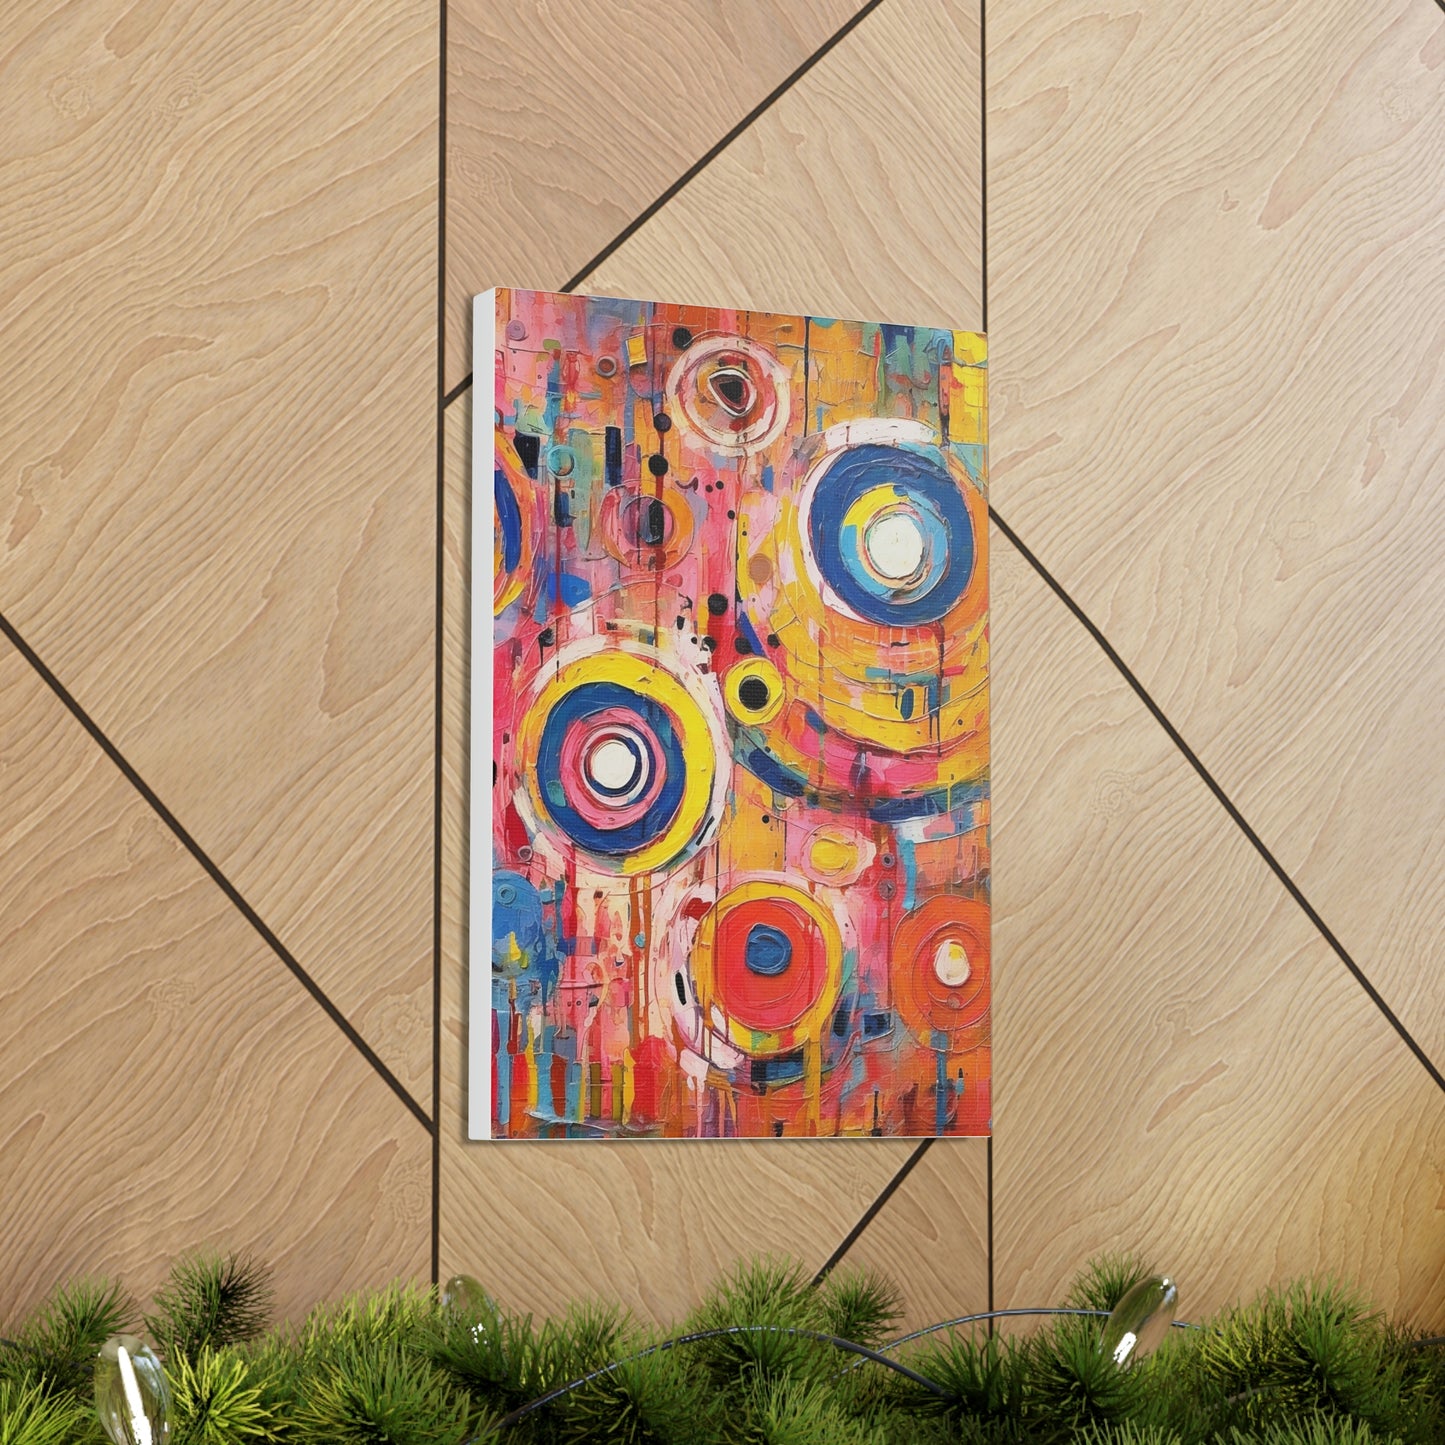 Abstract Collaborative Art, Unique Styles Fusion, Bold Color Display, Dynamic Shapes Mix Canvas Oil Painting